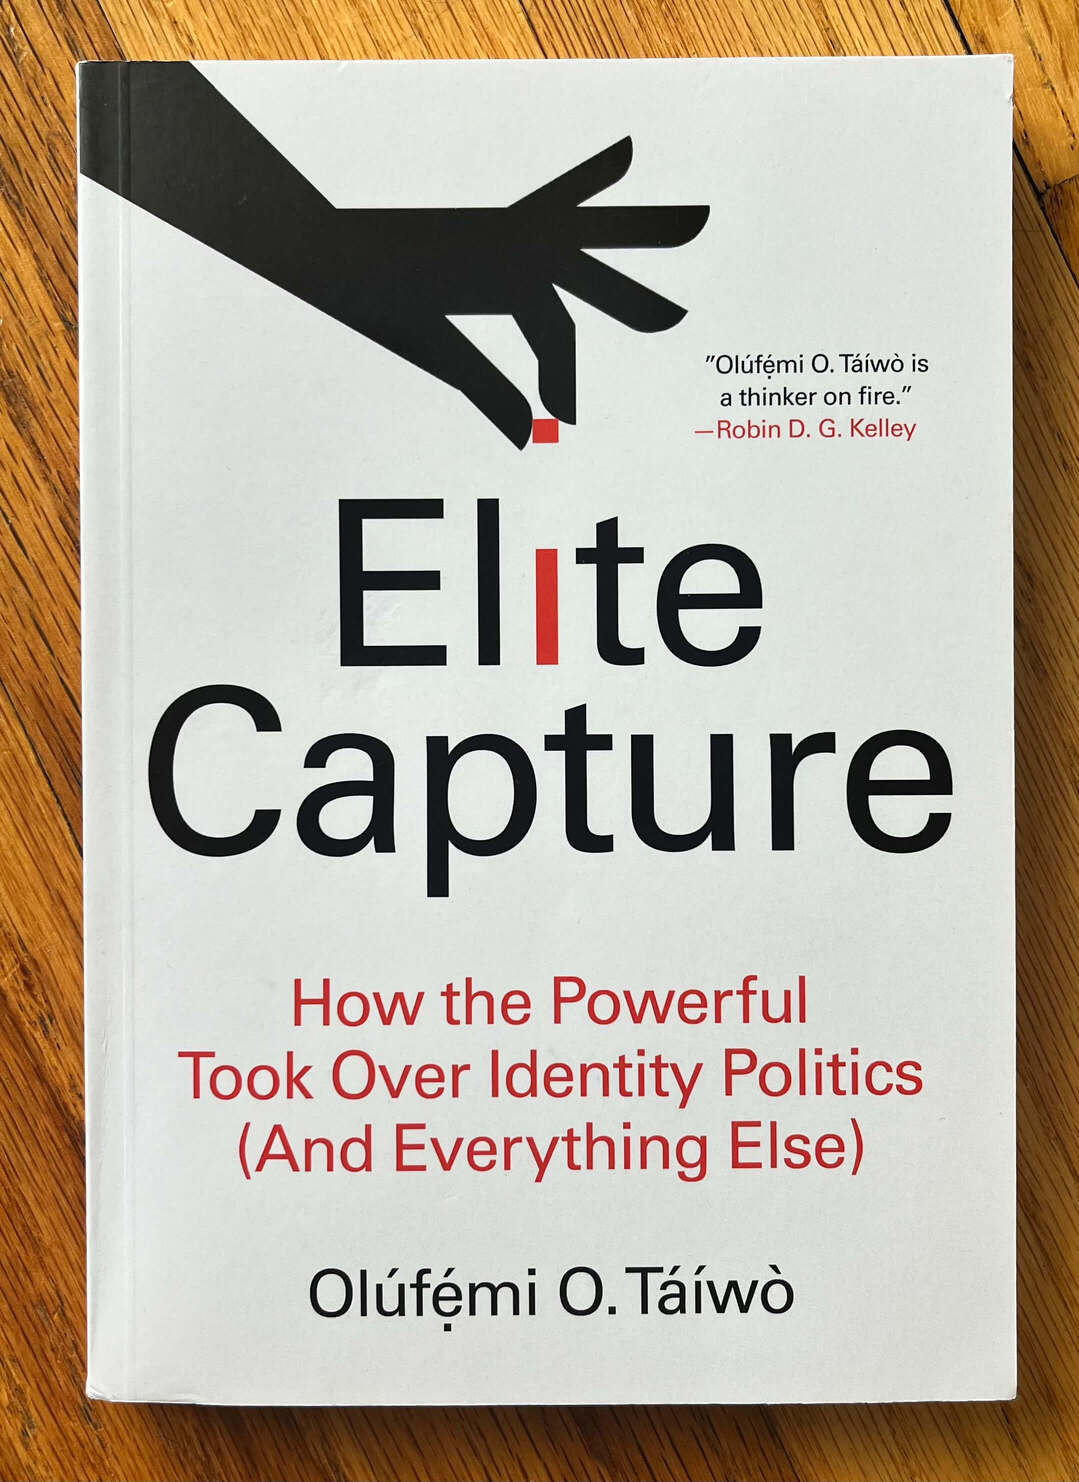 “Elite Capture: How the Powerful Took Over Identity Politics (And Everything Else)” by Olúfėmi O. Táíwò. “Olúfėmi O. Táíwò is a thinker on fire.” - Robin D. G. Kelley